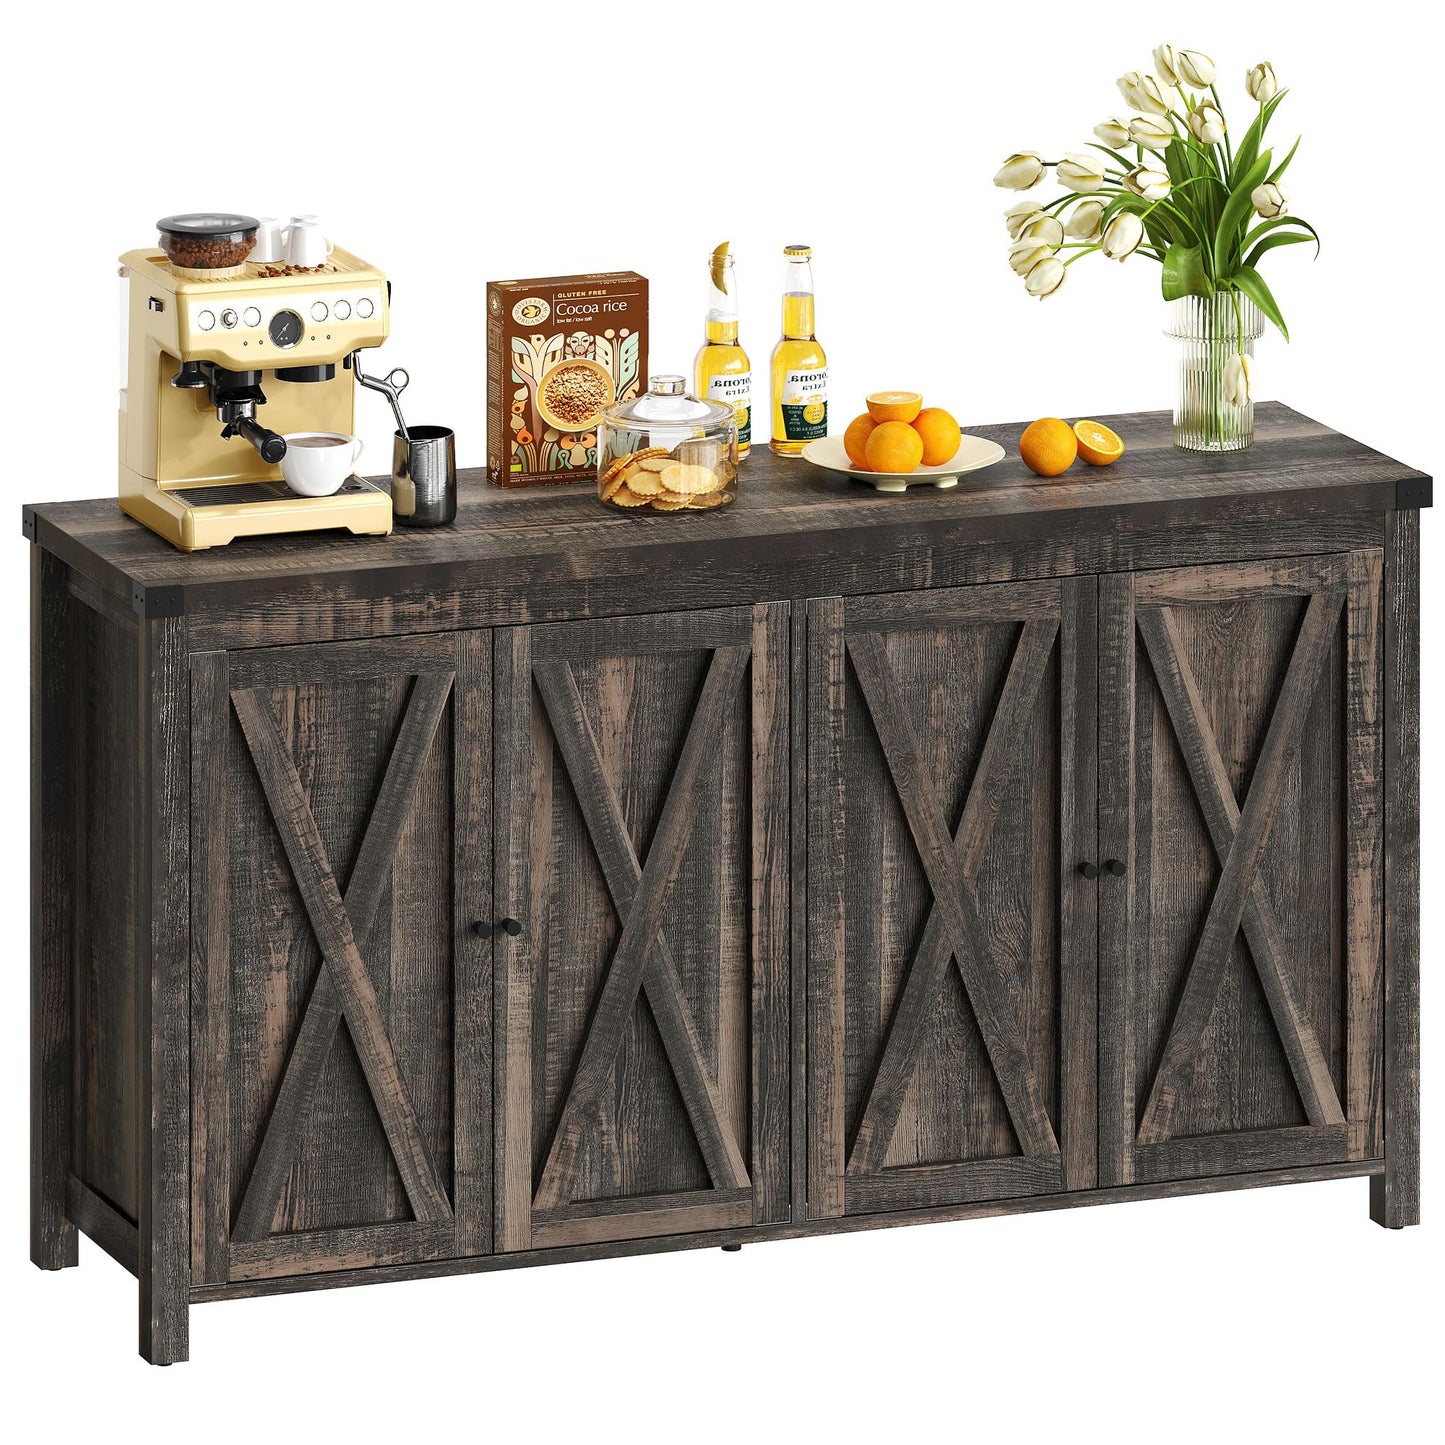 DWVO 55'' Sideboard Buffet Cabinet with Storage, Farmhouse Kitchen Storage Cabinet with 4 Doors, Large Wood Coffee Bar Cabinet with Adjustable Shelfs for Kitchen, Living Room, Dark Oak